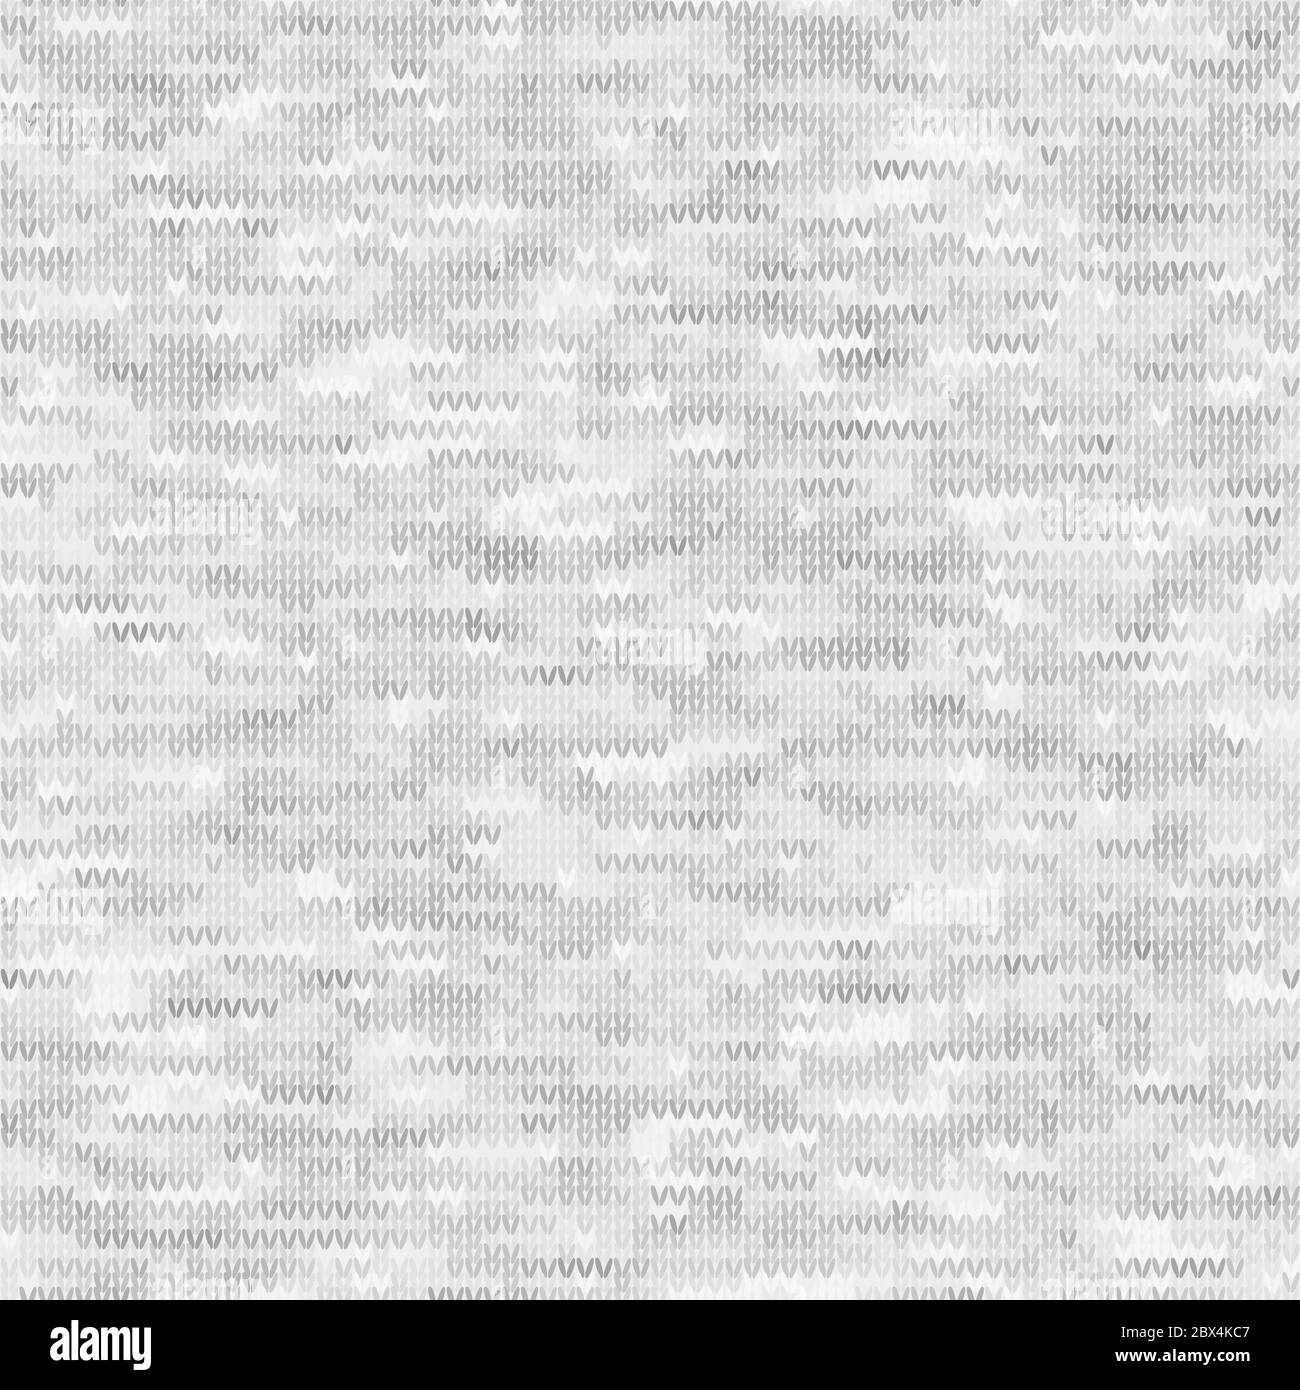 https://c8.alamy.com/comp/2BX4KC7/white-grey-marl-knit-melange-heathered-texture-background-faux-knitted-fabric-with-vertical-t-shirt-style-seamless-vector-pattern-light-gray-space-2BX4KC7.jpg